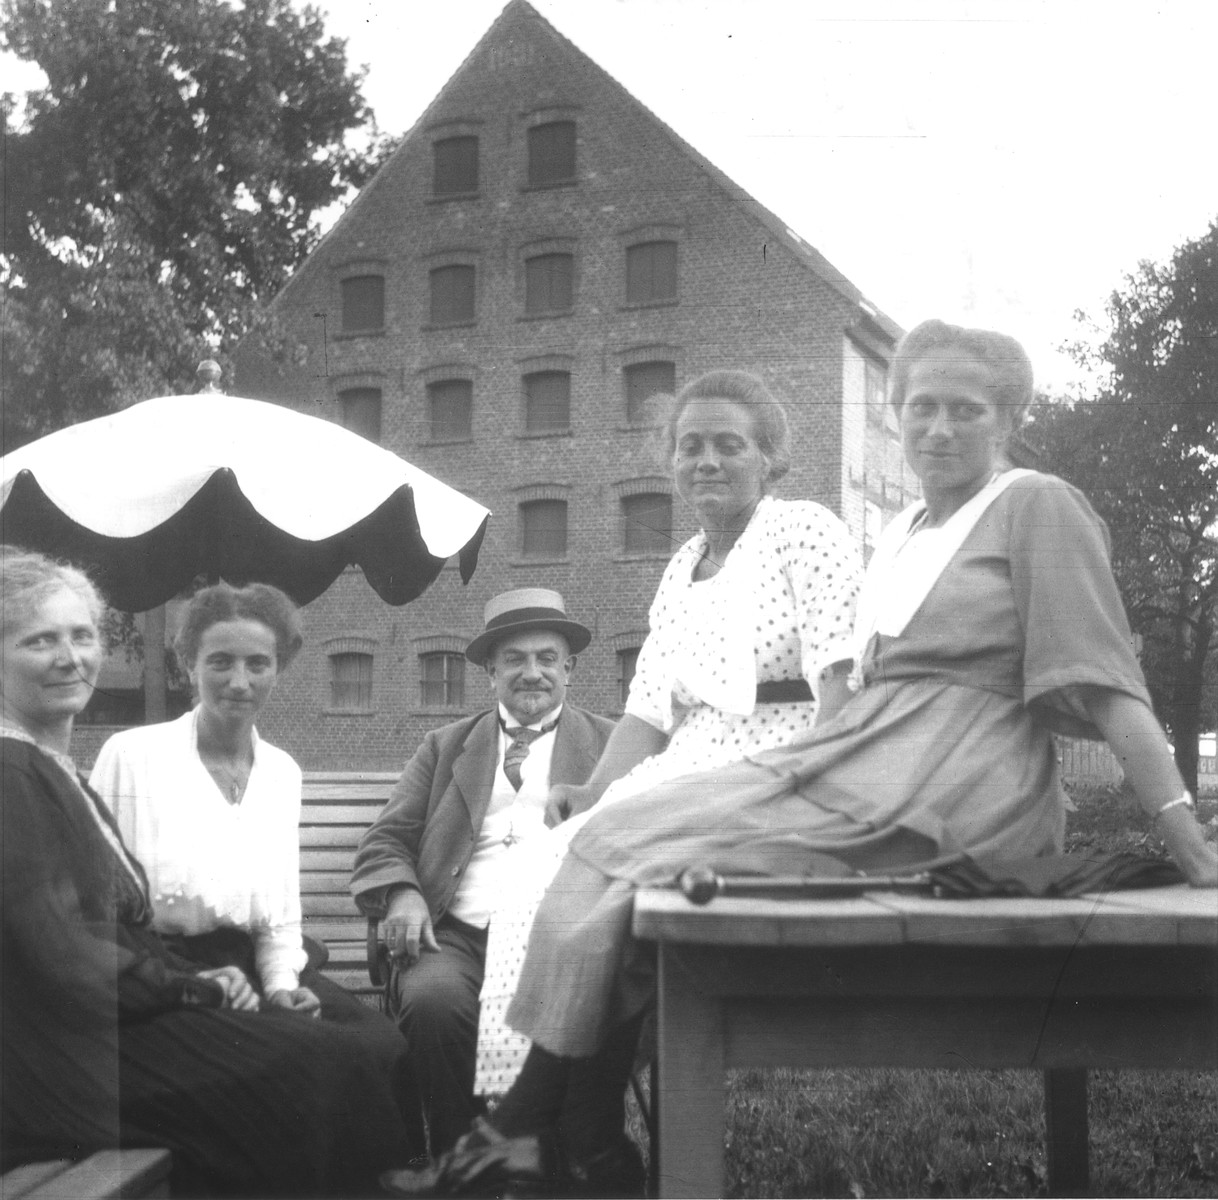 Members of the Gottschalk family pose outside.

Pictured from left to right are: Bertha, Gertrud, Hugo, Nanny and Kaethe Gottschalk.